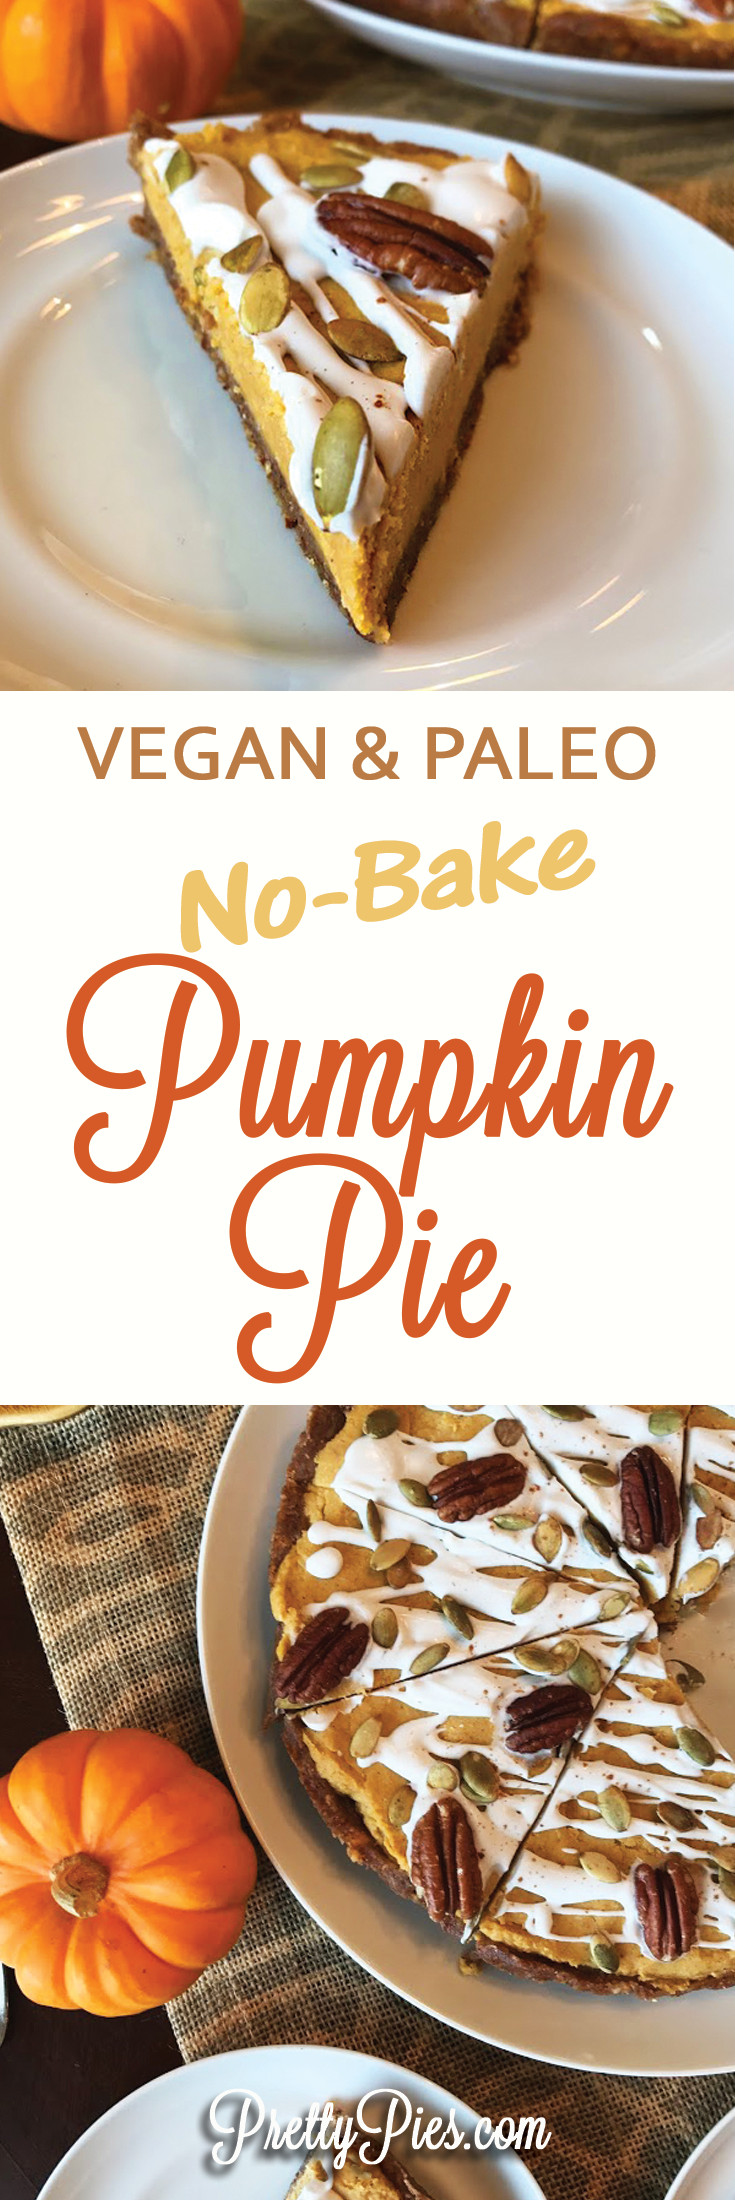 Pumpkin Pie Recipe Without Eggs
 Incredibly rich and creamy pie without eggs grains dairy